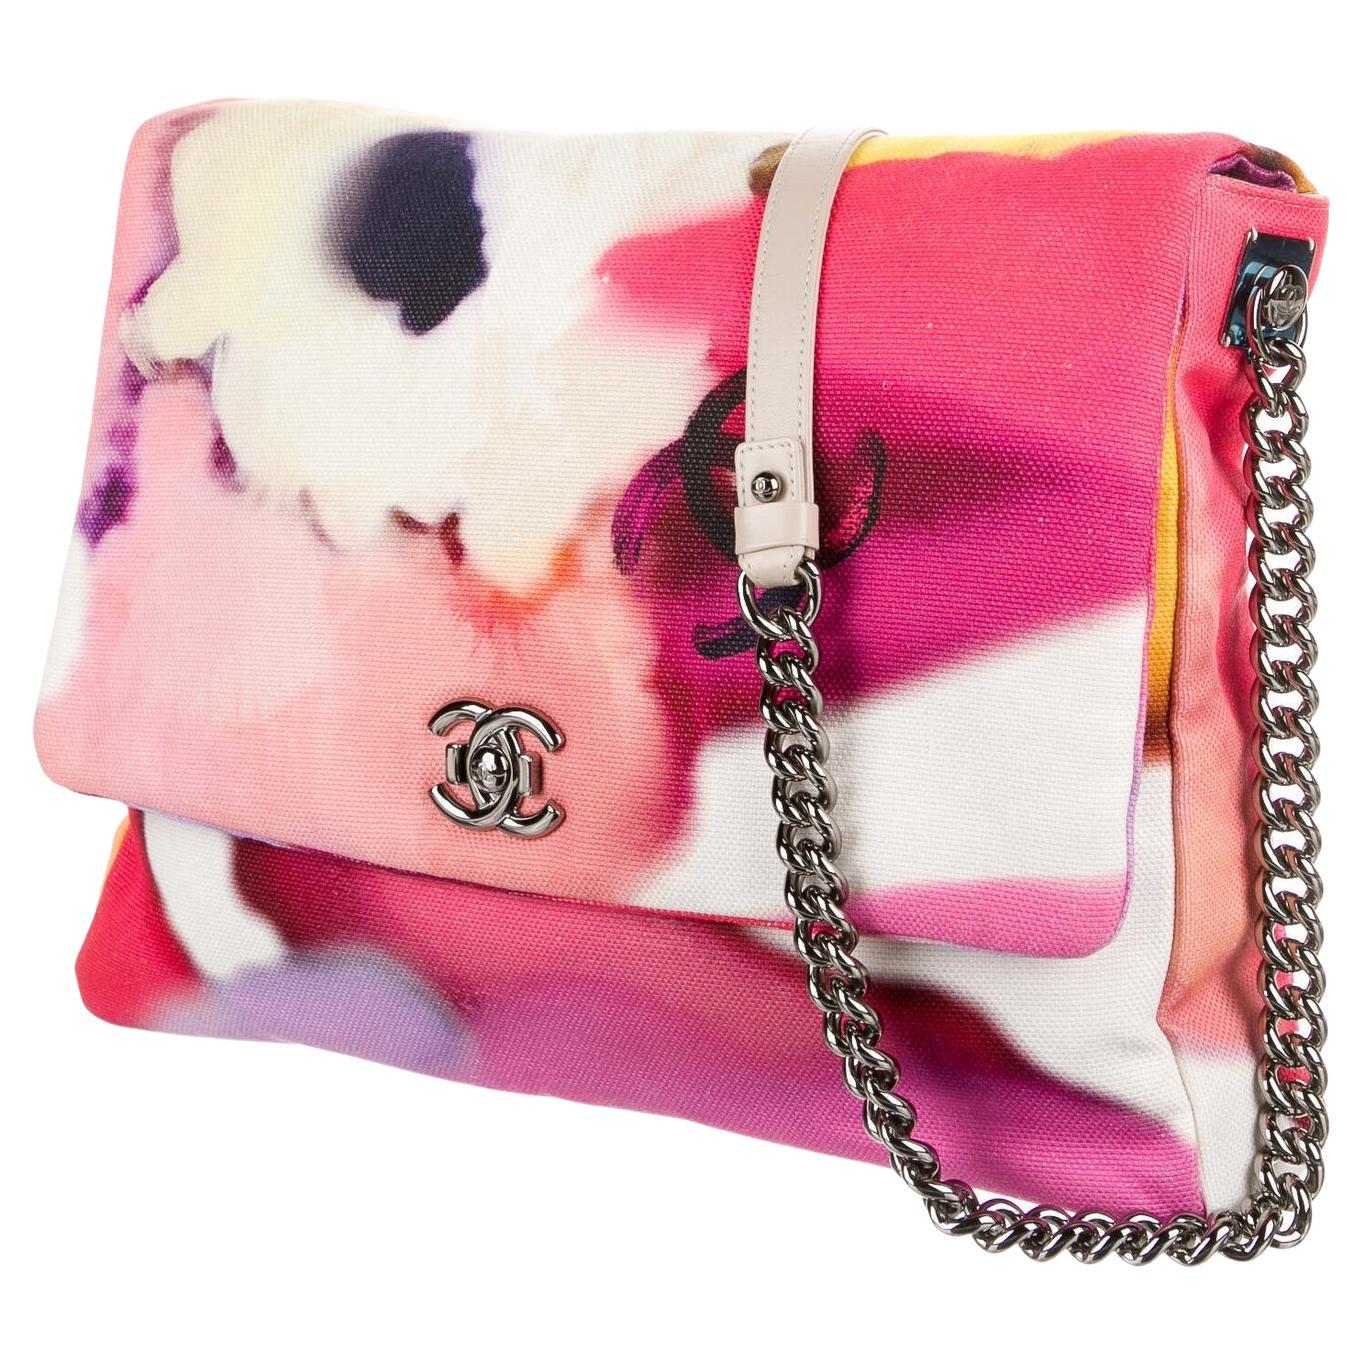 Chanel Shoulder Bag

From the Spring/Summer 2015 Collection by Karl Lagerfeld
Pink Floral Print
Silver-Tone Hardware
Chain-Link Shoulder Strap
Twill Lining & Dual Interior Pockets
Flap & Push-Lock Closures at Front

Made in Italy